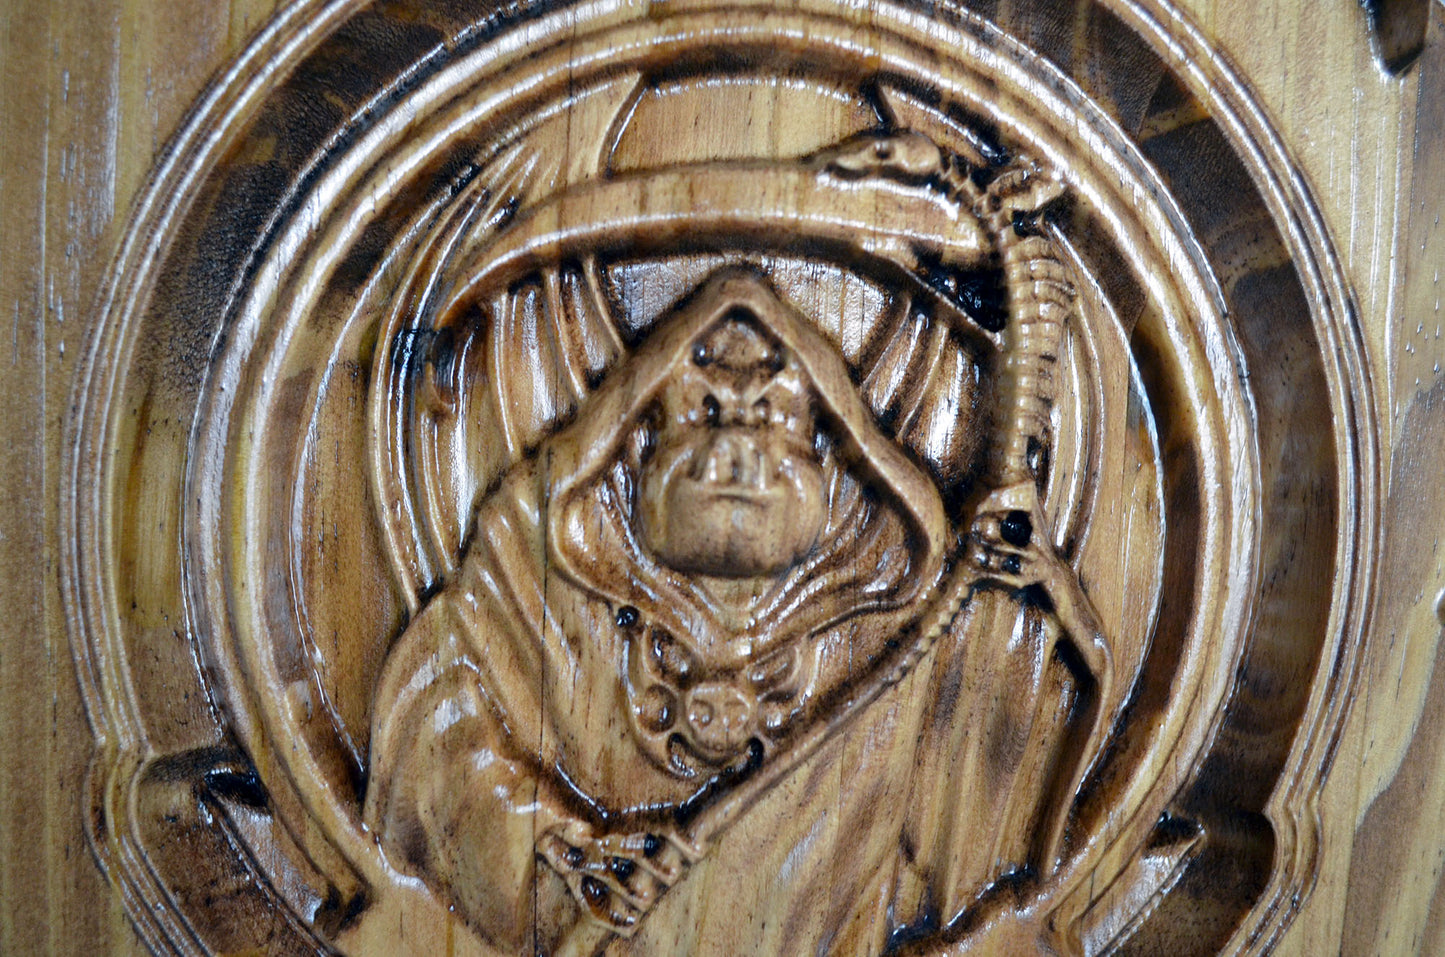 USMC VMU-1 Marine Unmanned Aerial Vehicle Squadron, Watchdogs Marine Corps, 3d wood carving military plaque